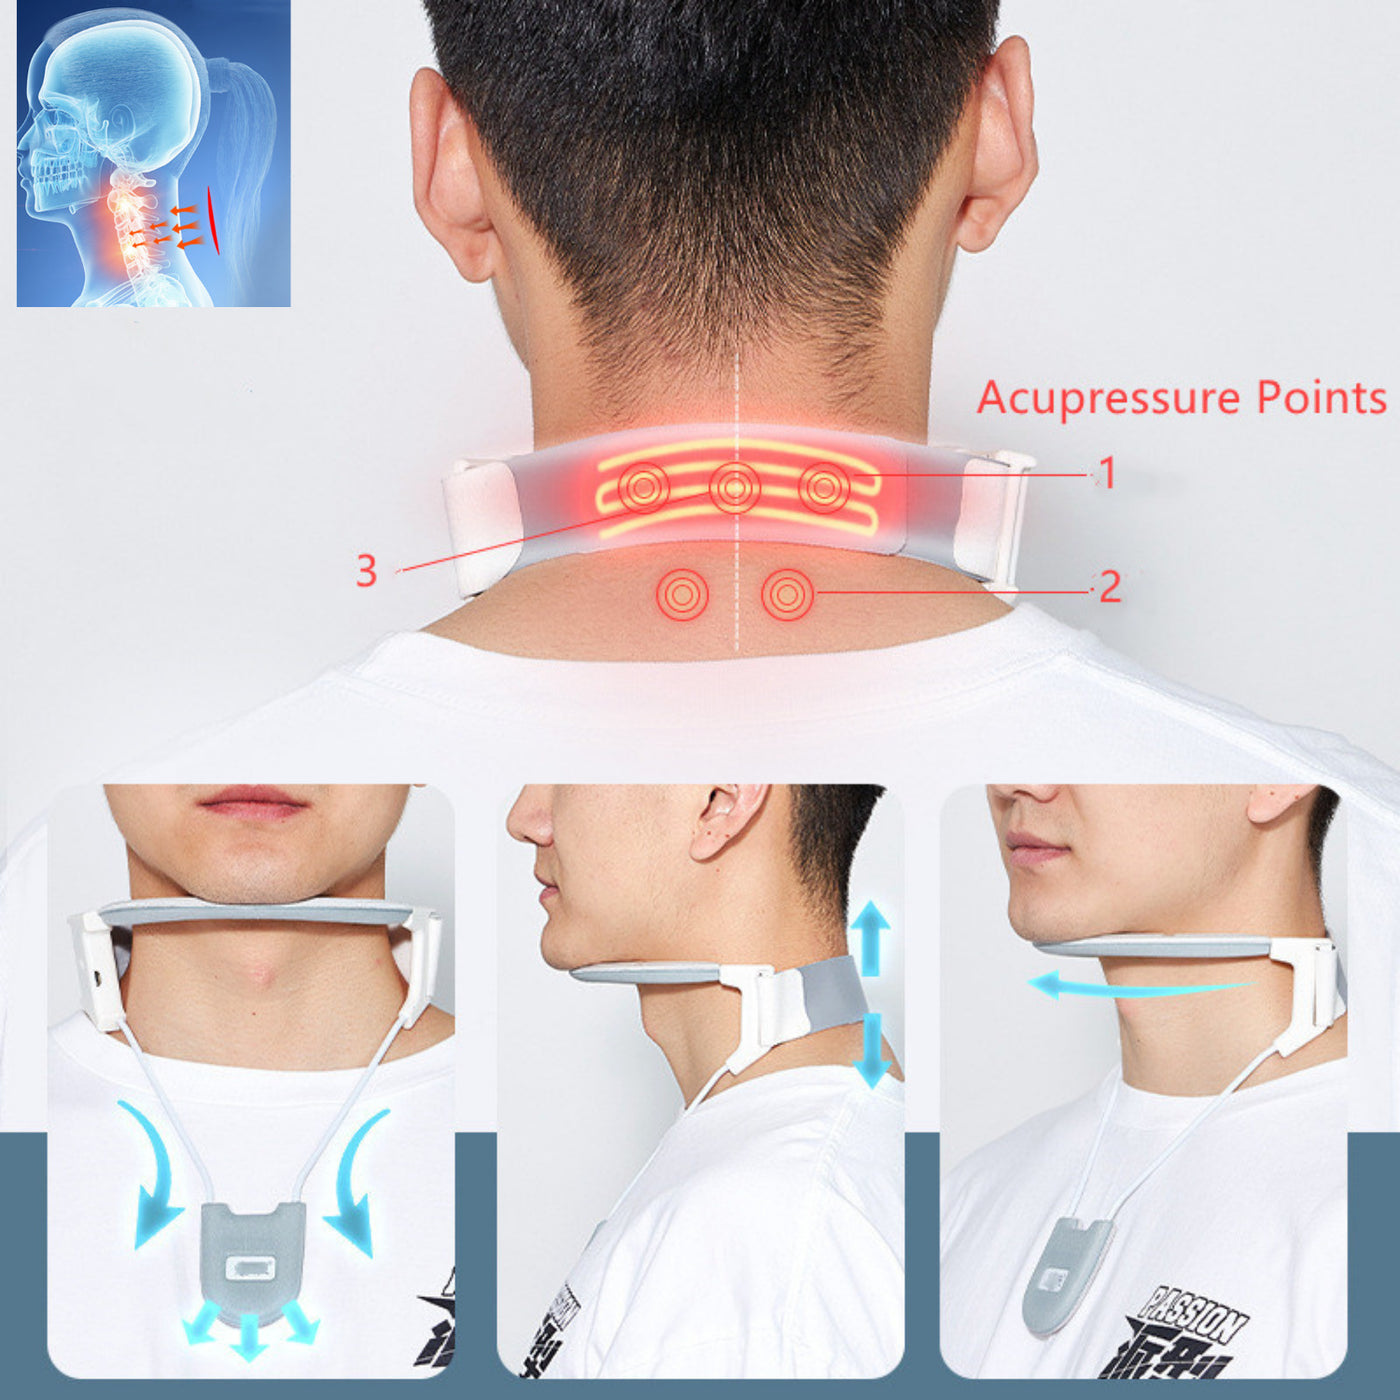 Neck Brace with/without Graphene Heating Pad